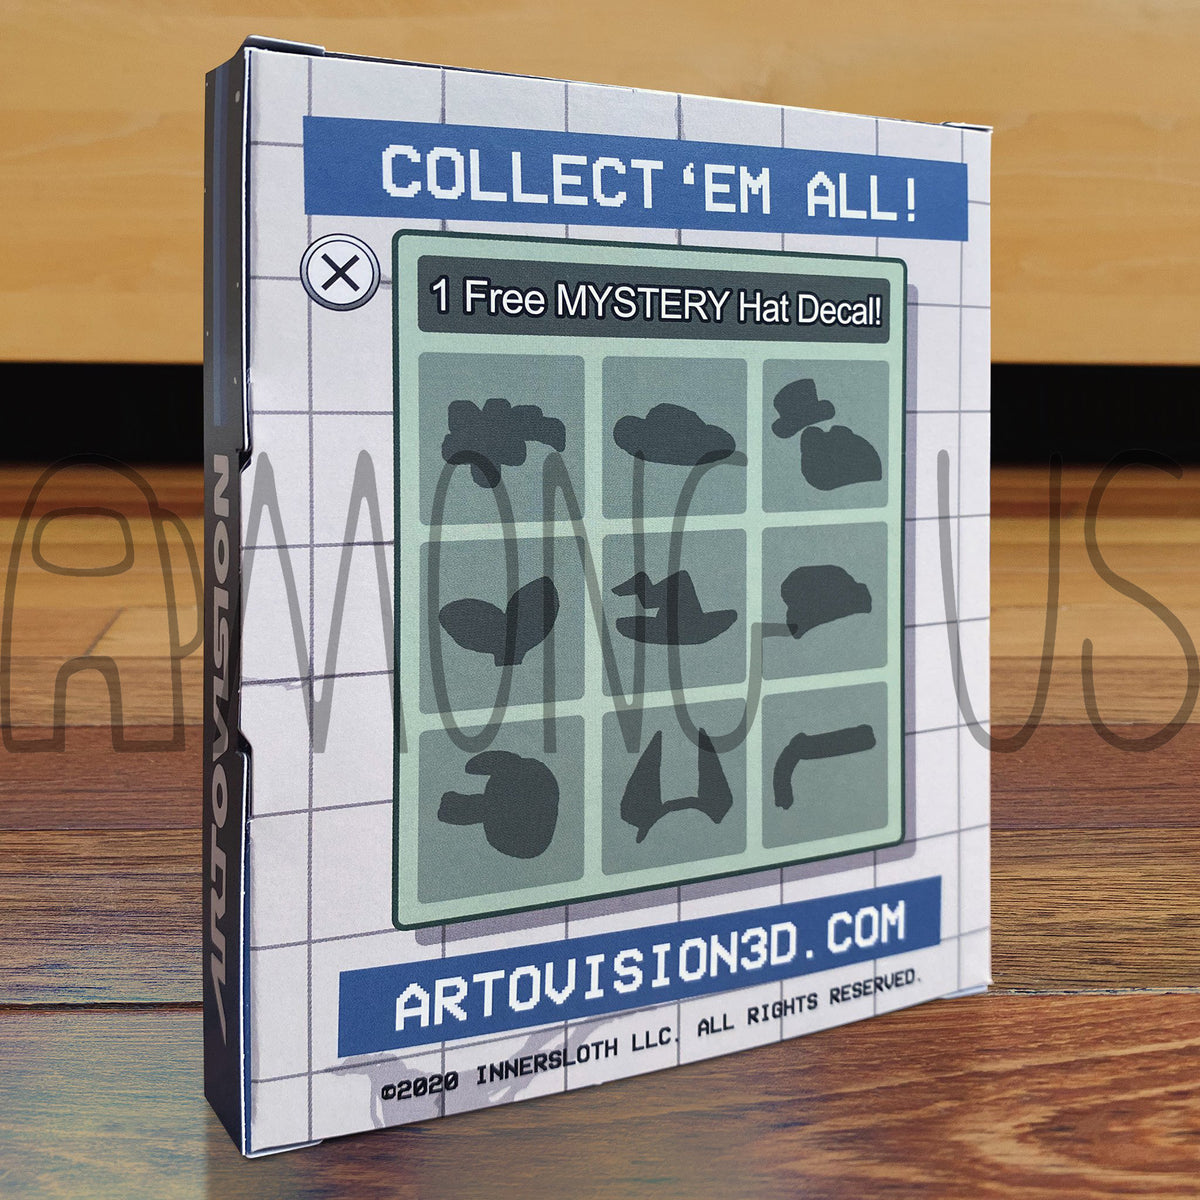 A photo of the back of the Crewmate Art Tiles box. This advertises a free mystery hat decal. All of them are silhouetted and greyed out. The box reads “Collect ‘em all!” and provides the Artovision3D website: artovision3d.com. 